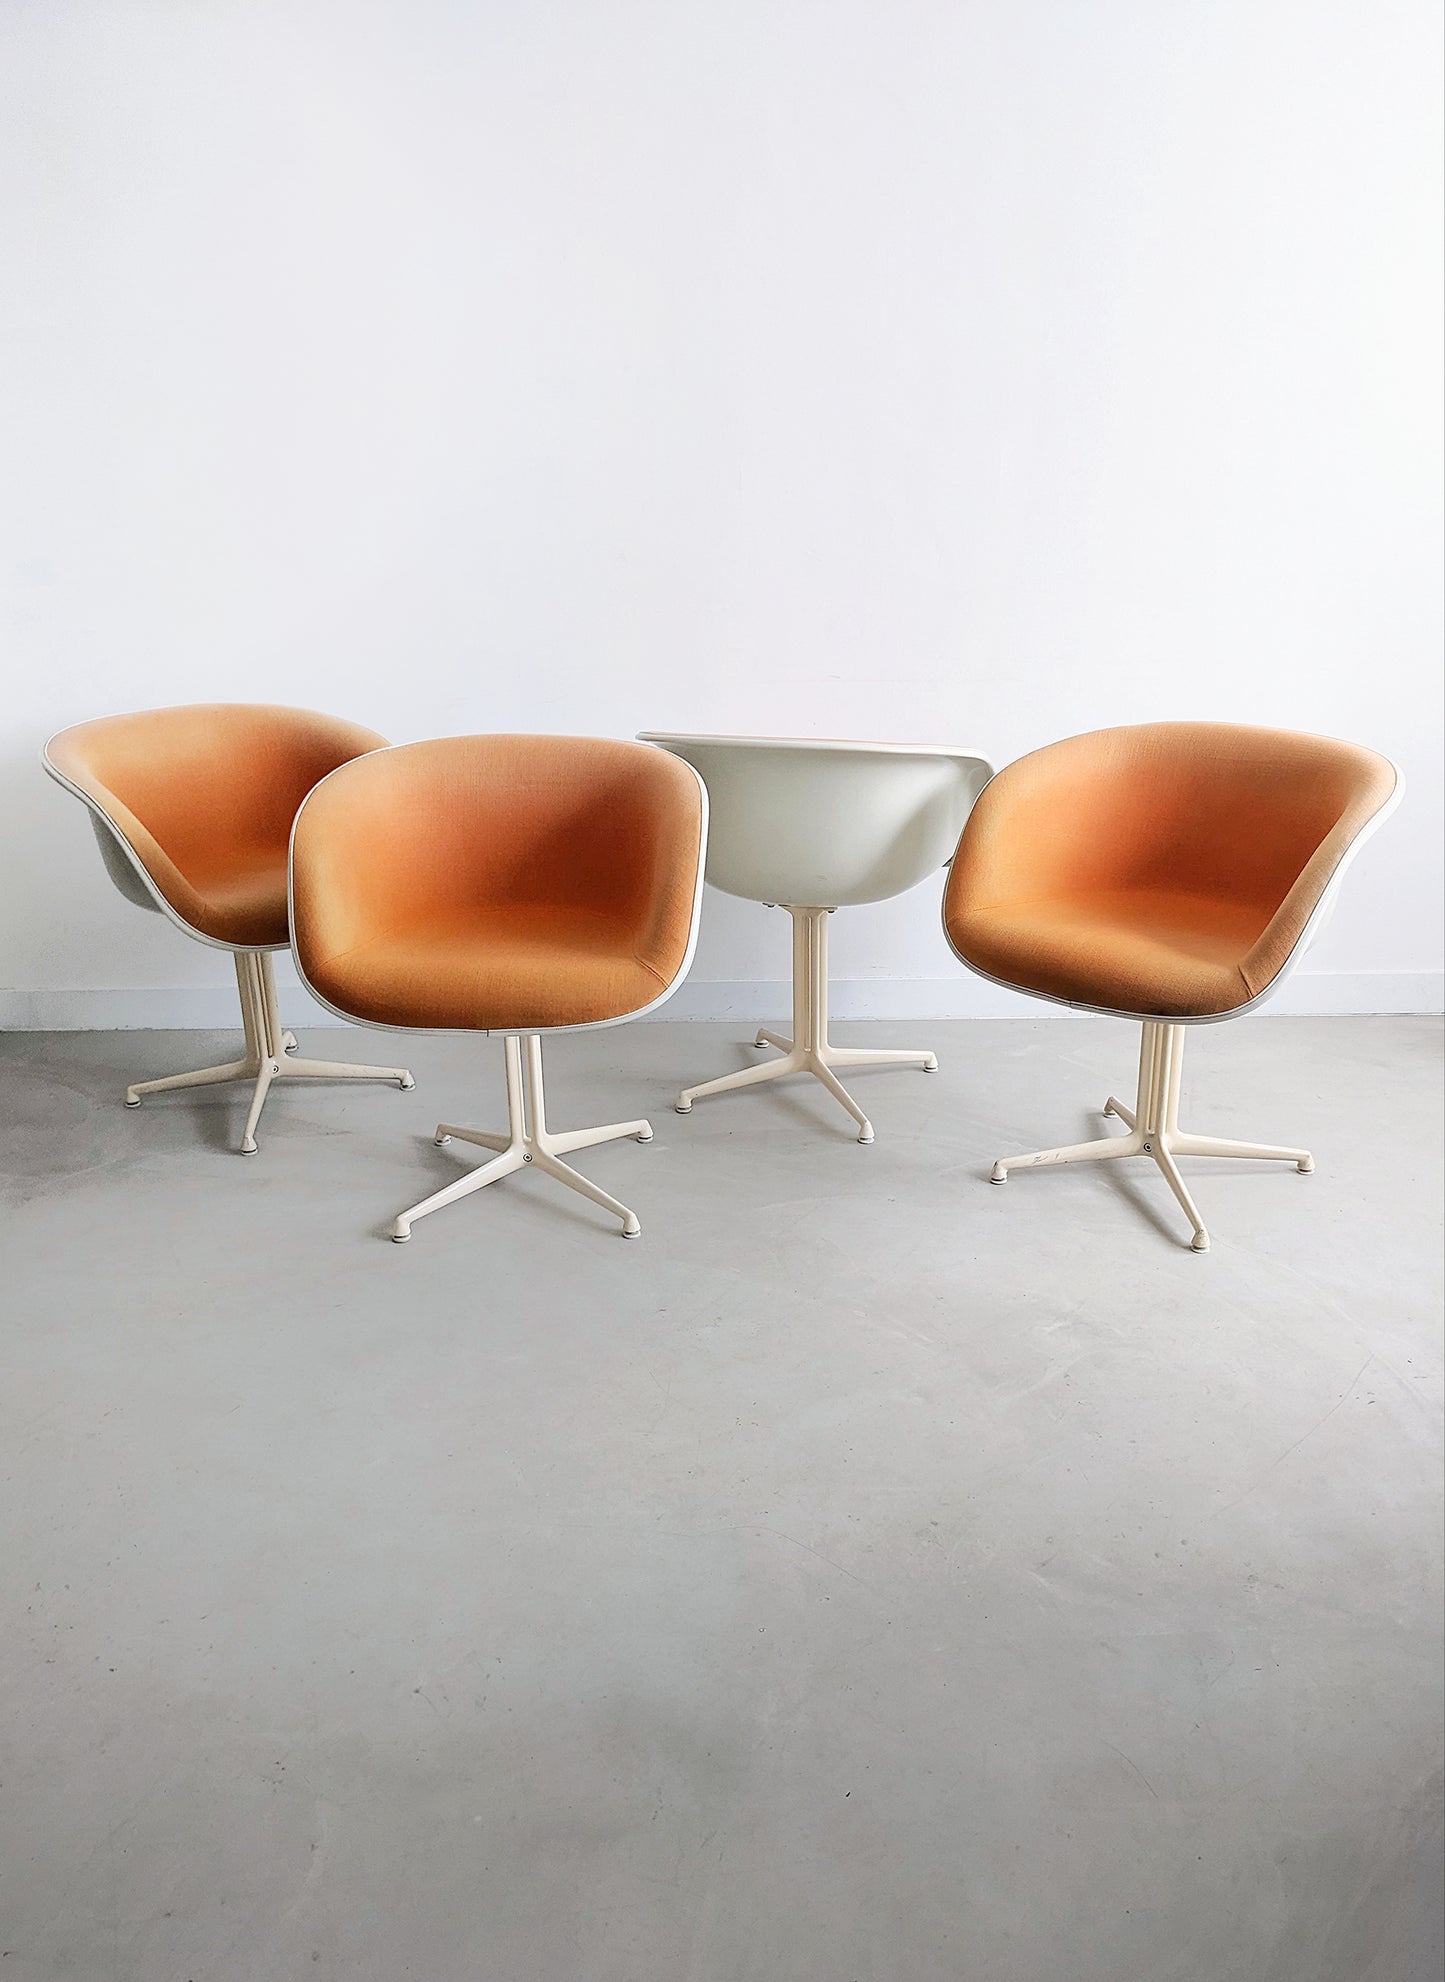 Set of 4 'La Fonda' Dining Chairs by Ray & Charles Eames for Herman Miller 1960's